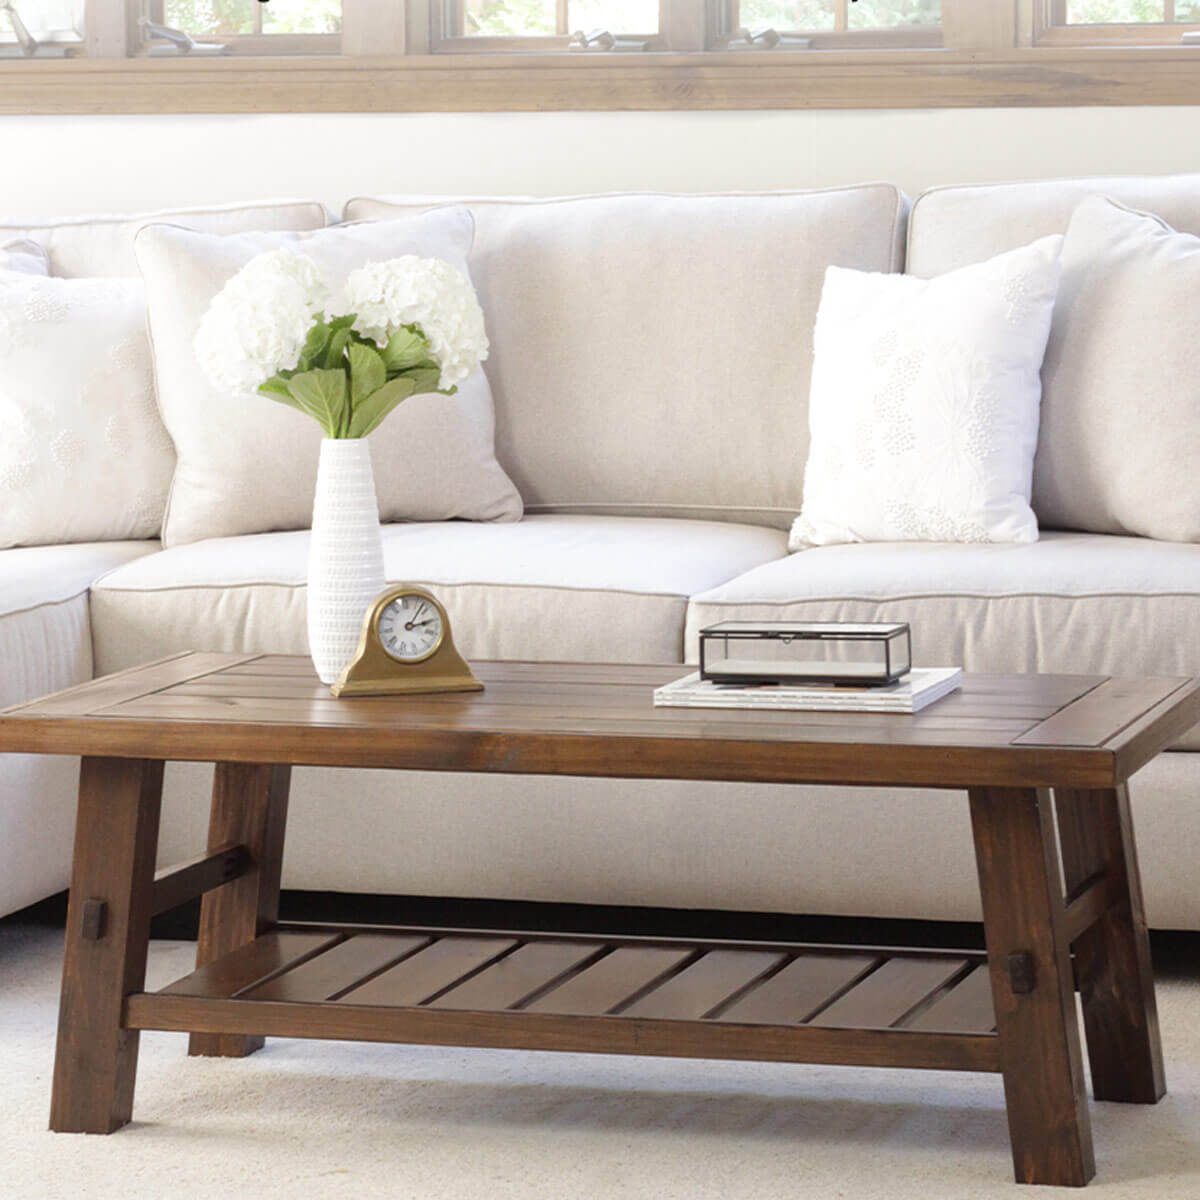 14 DIY Coffee Table Ideas and Designs (2019)